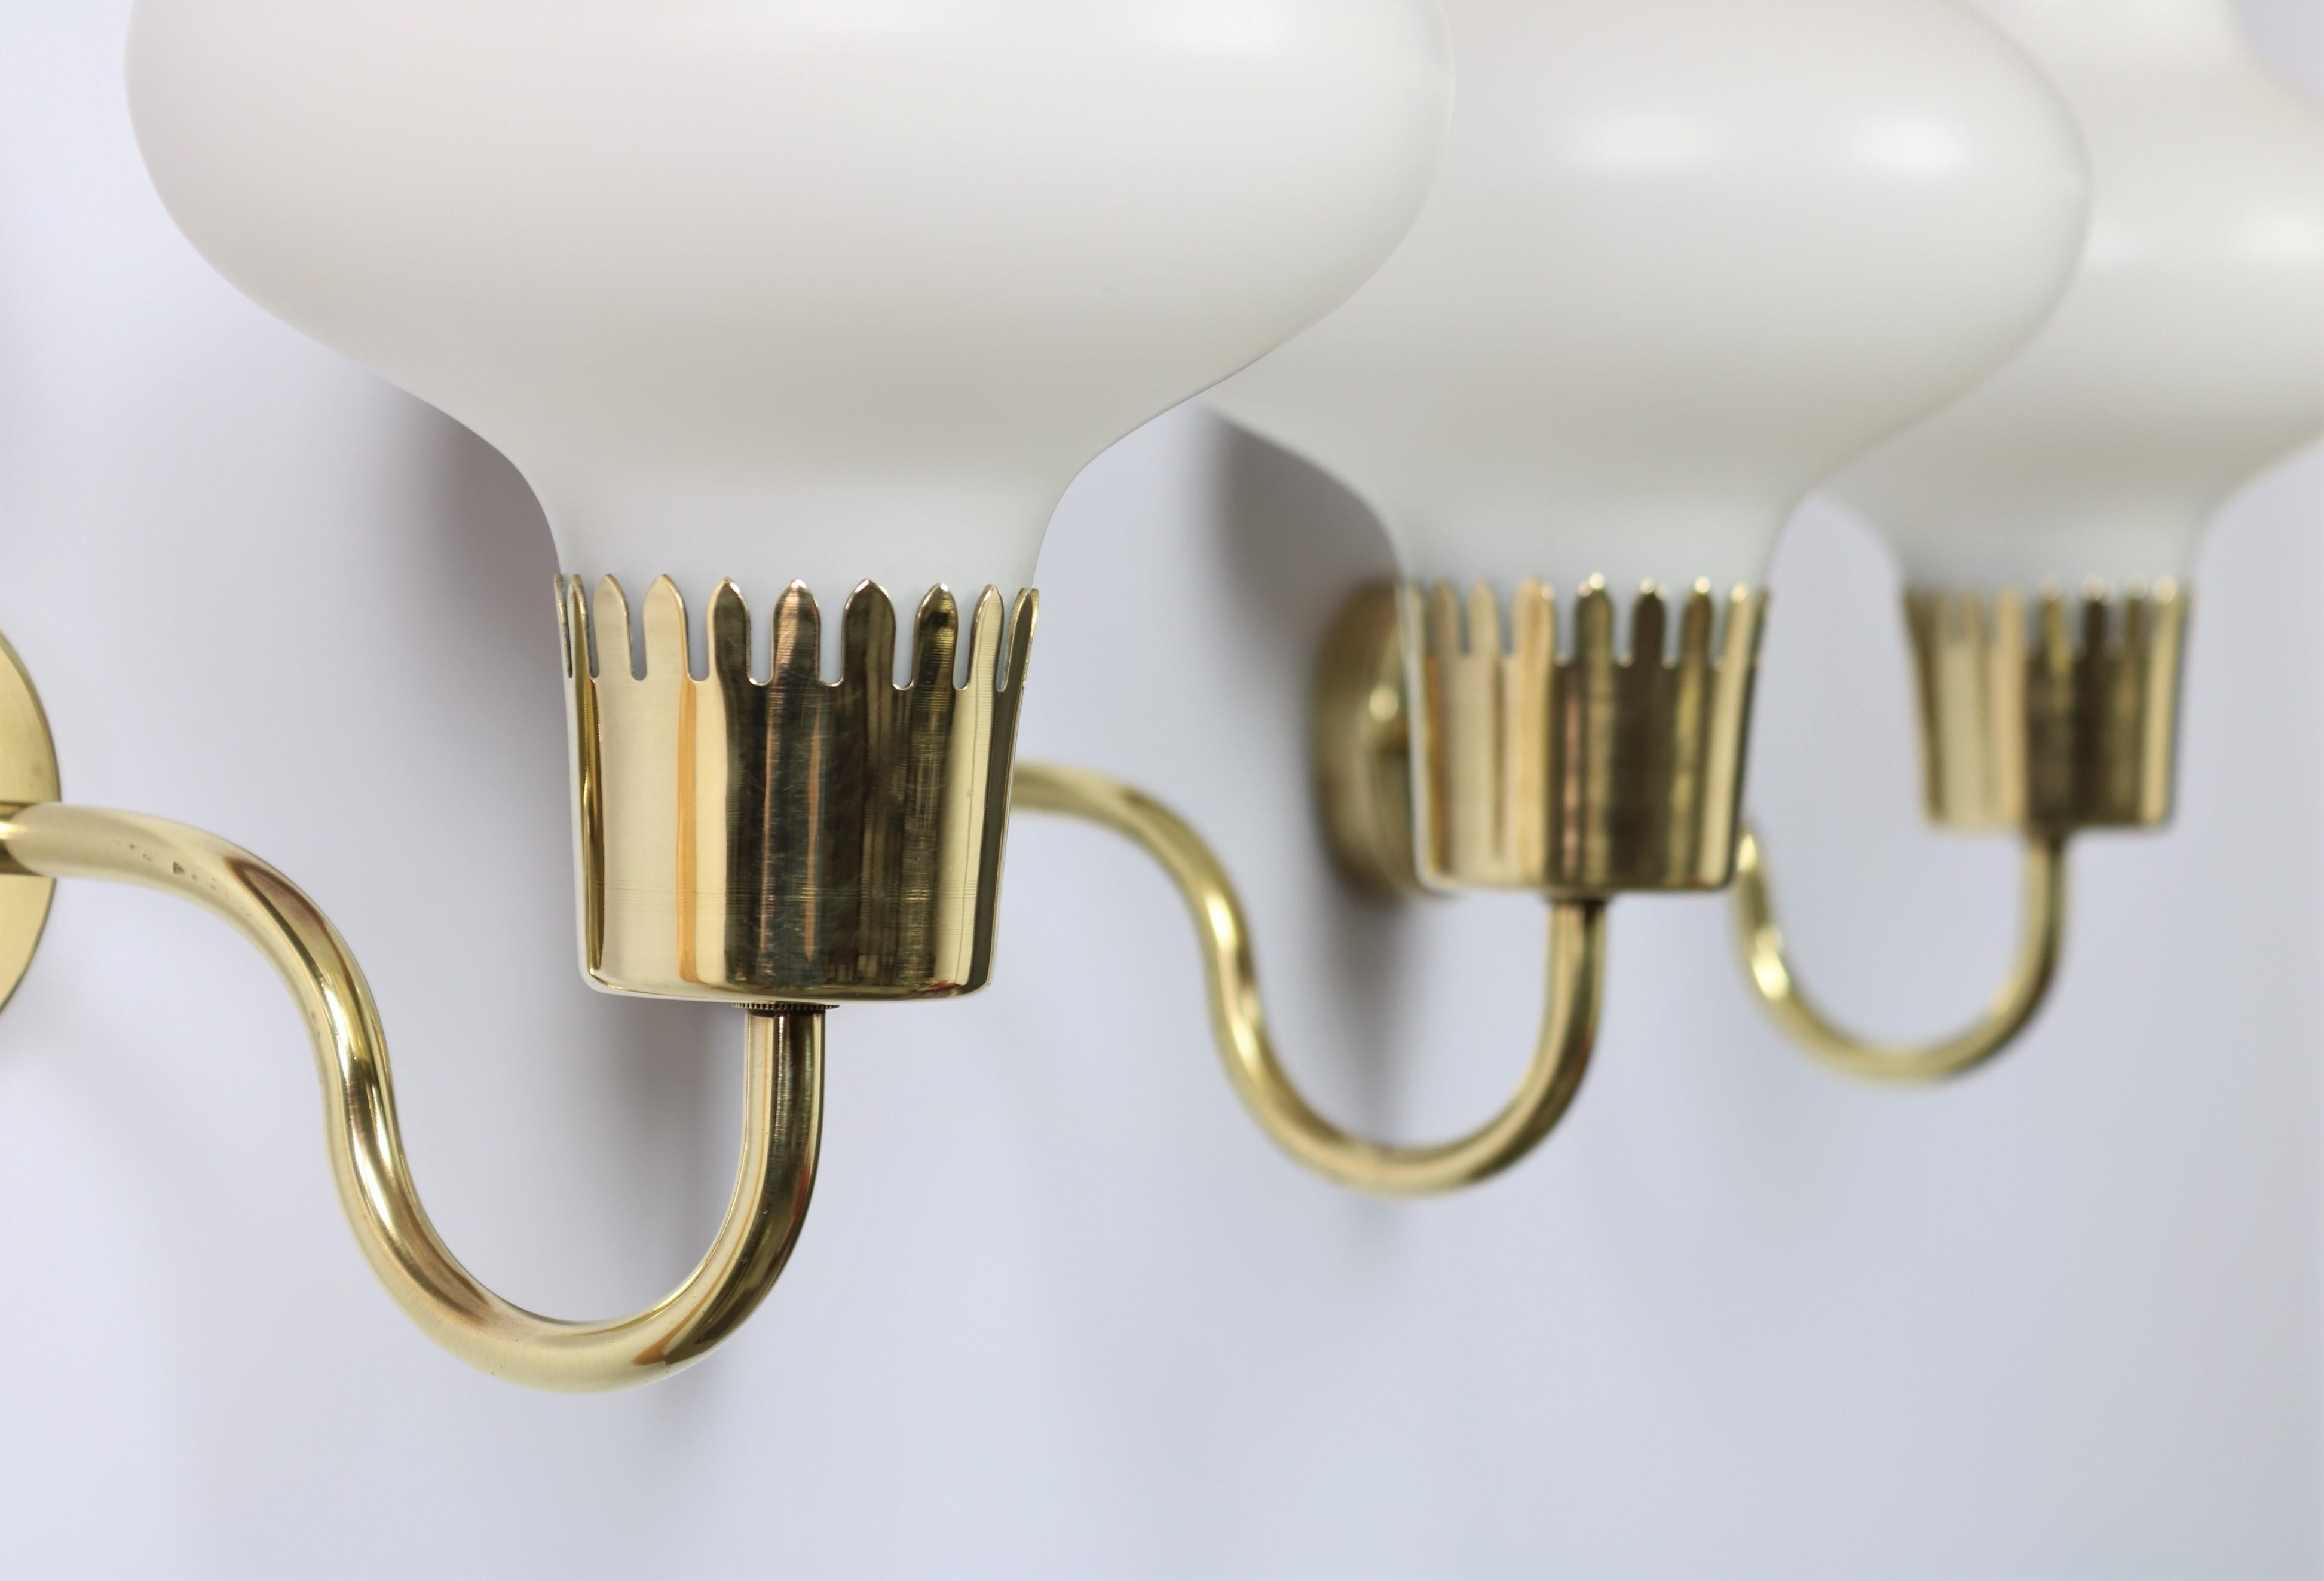 Set of Danish Modern Brass and Opal Glass Wall Sconces by Acton Bjorn, 1950s For Sale 3